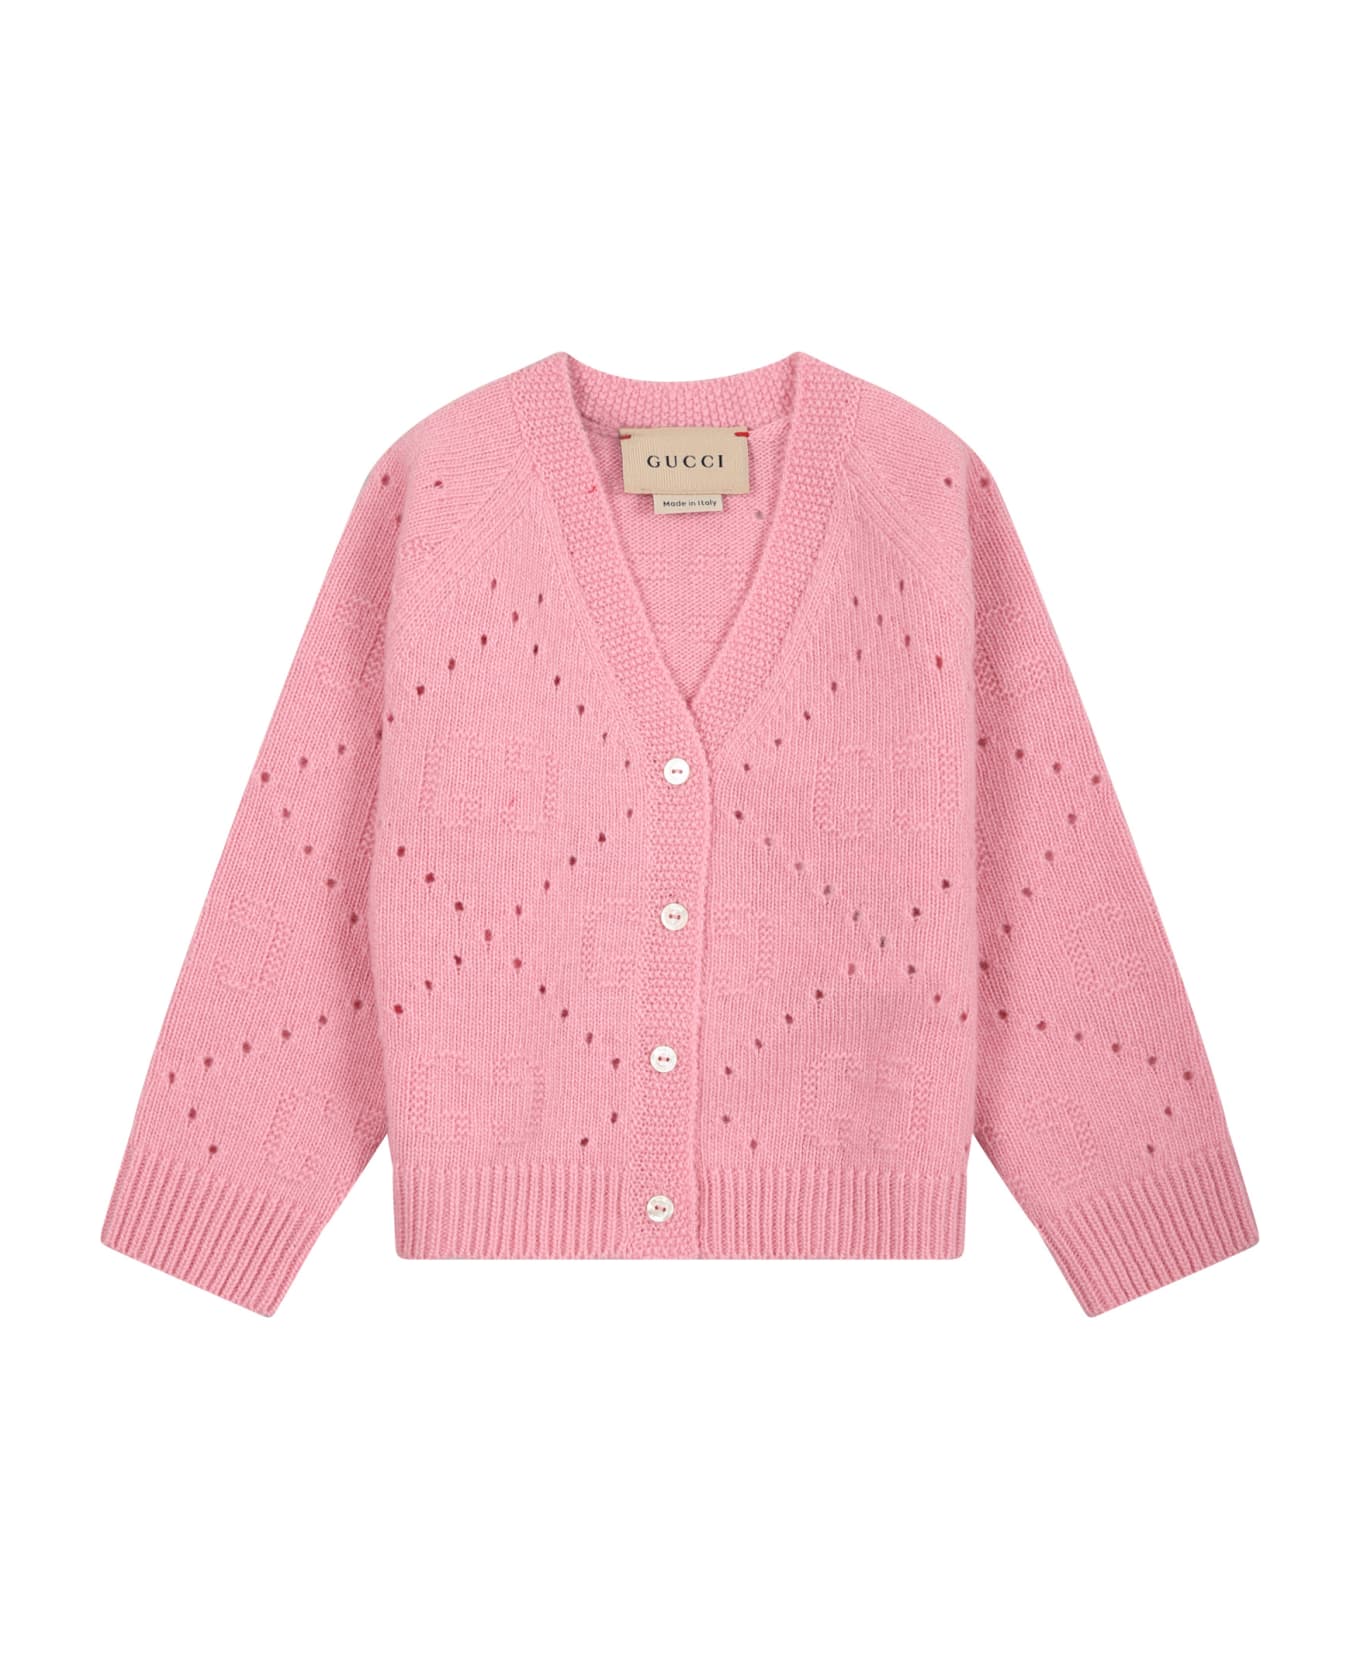 Gucci Pink Cardigan For Baby Girl With Gg - Pink